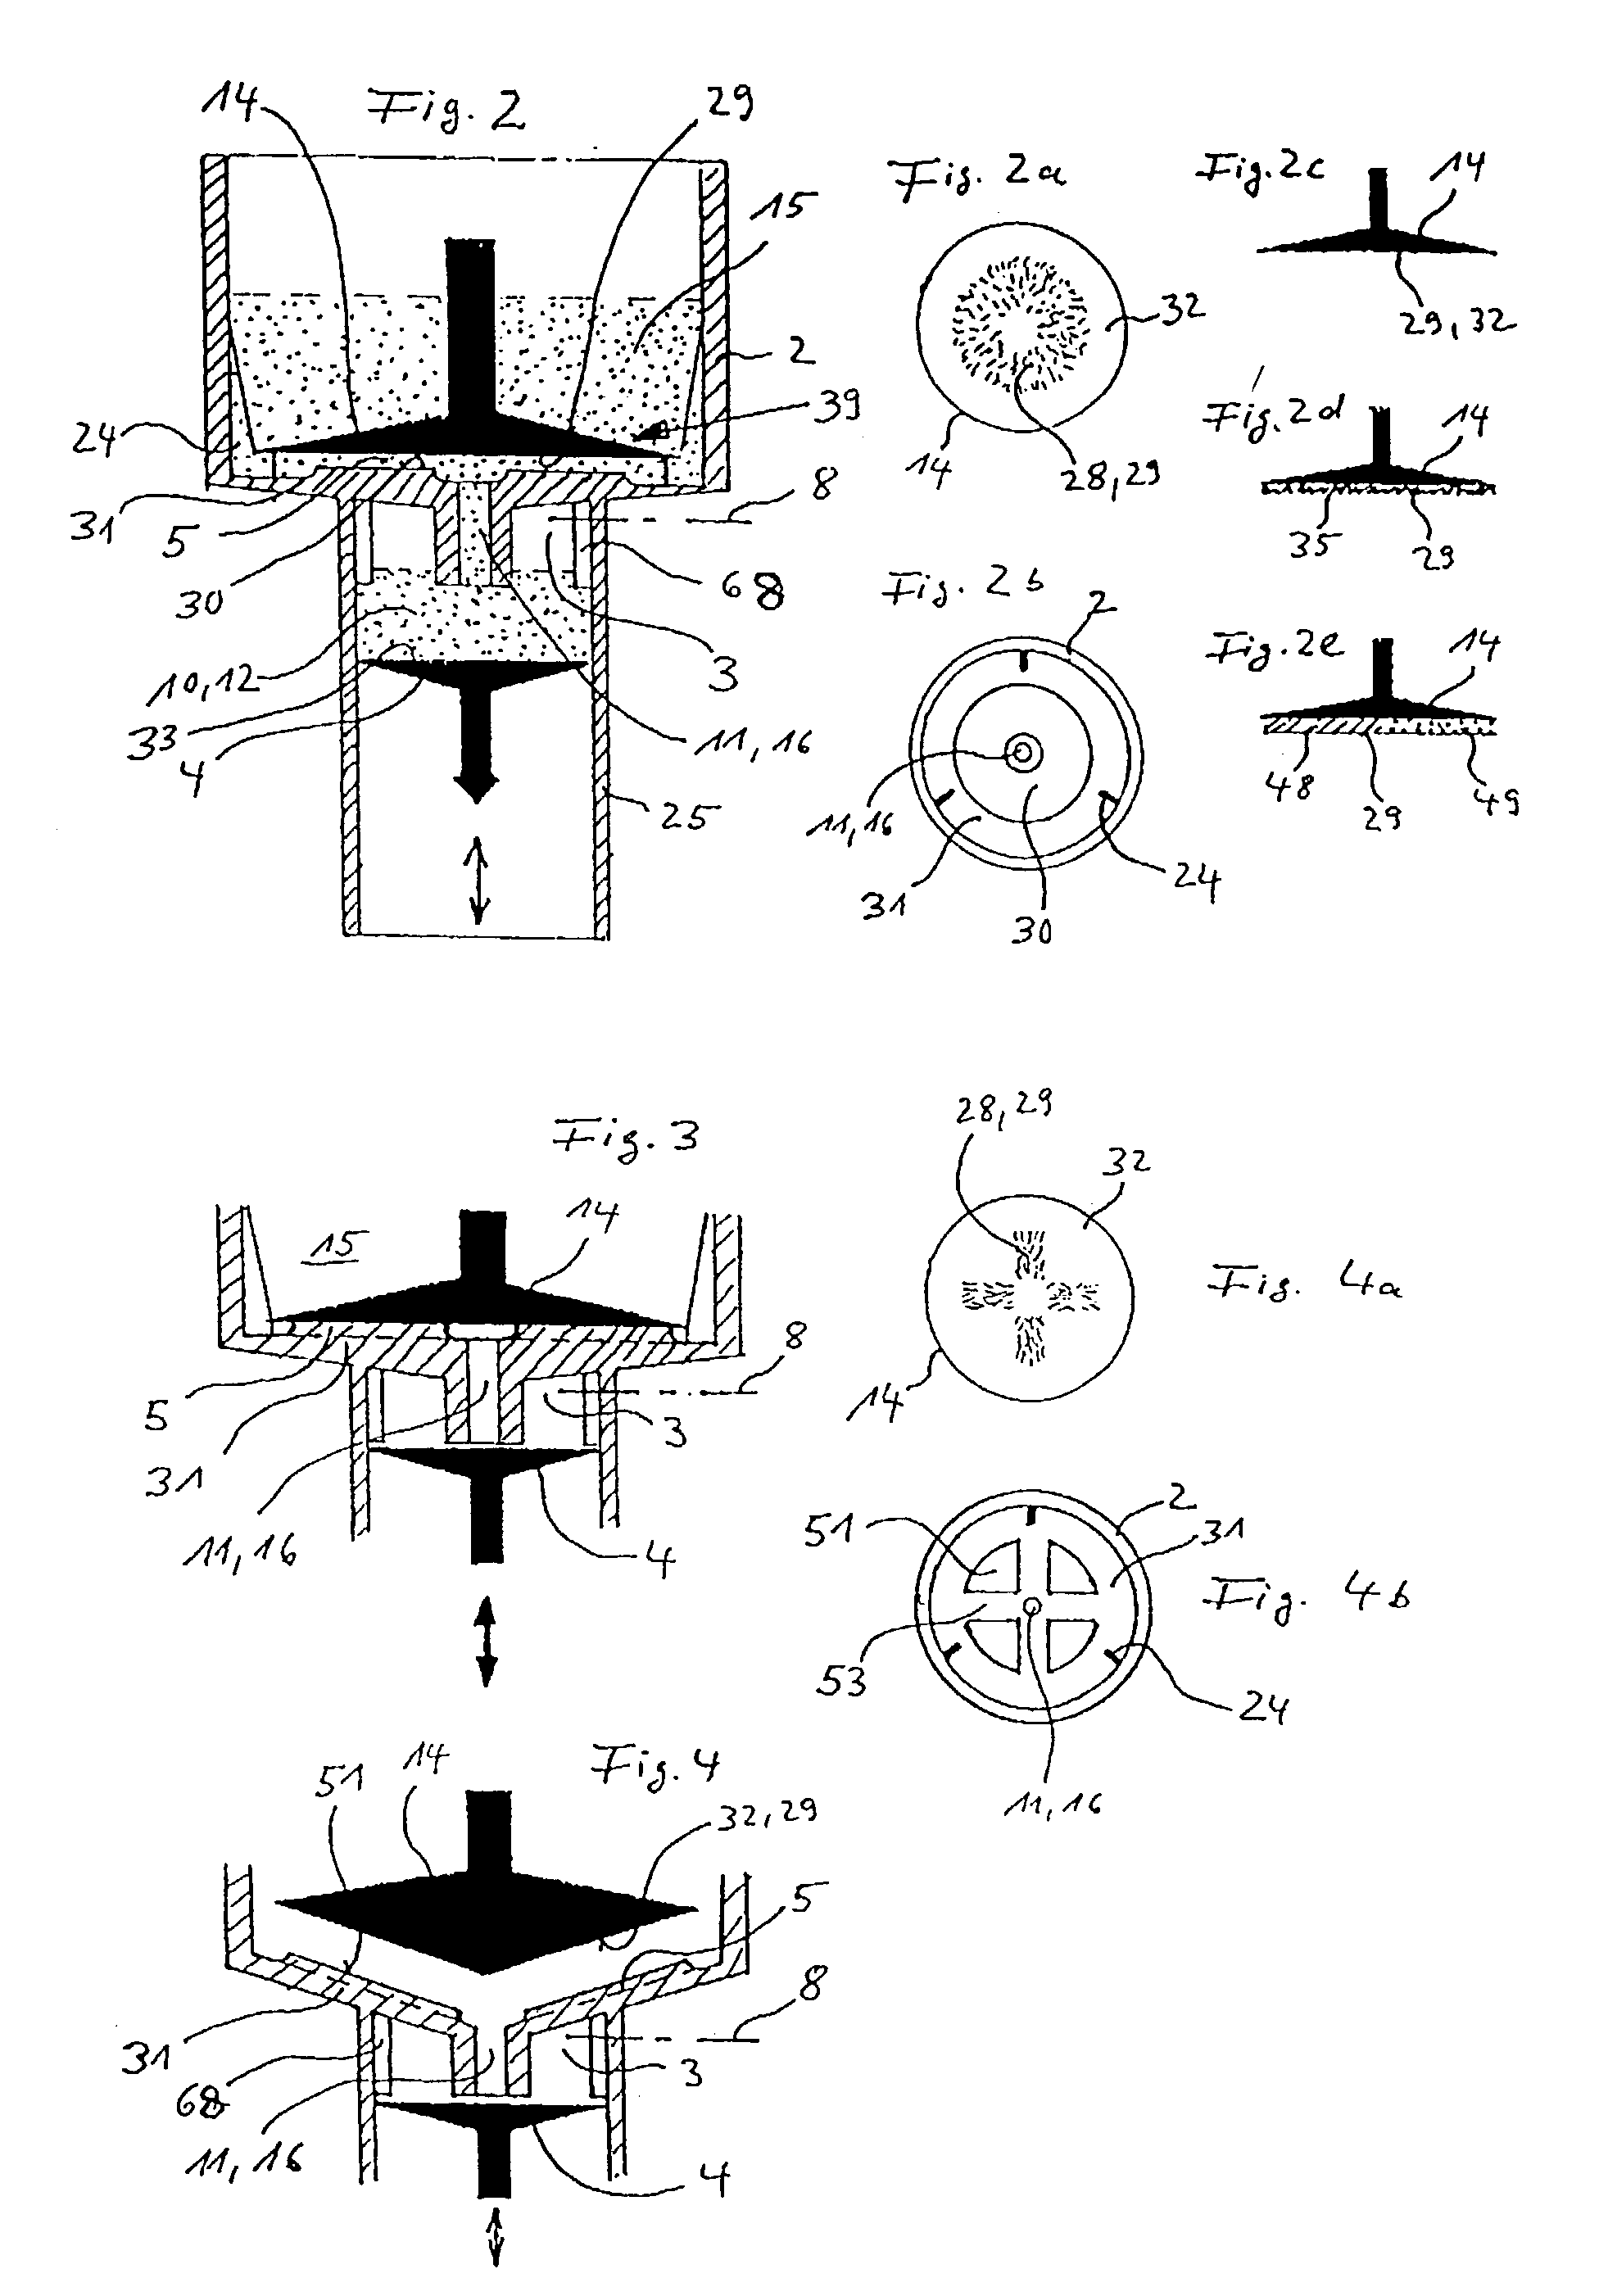 Device and method for detecting the coagulation functions of global, especially primary hemostasis